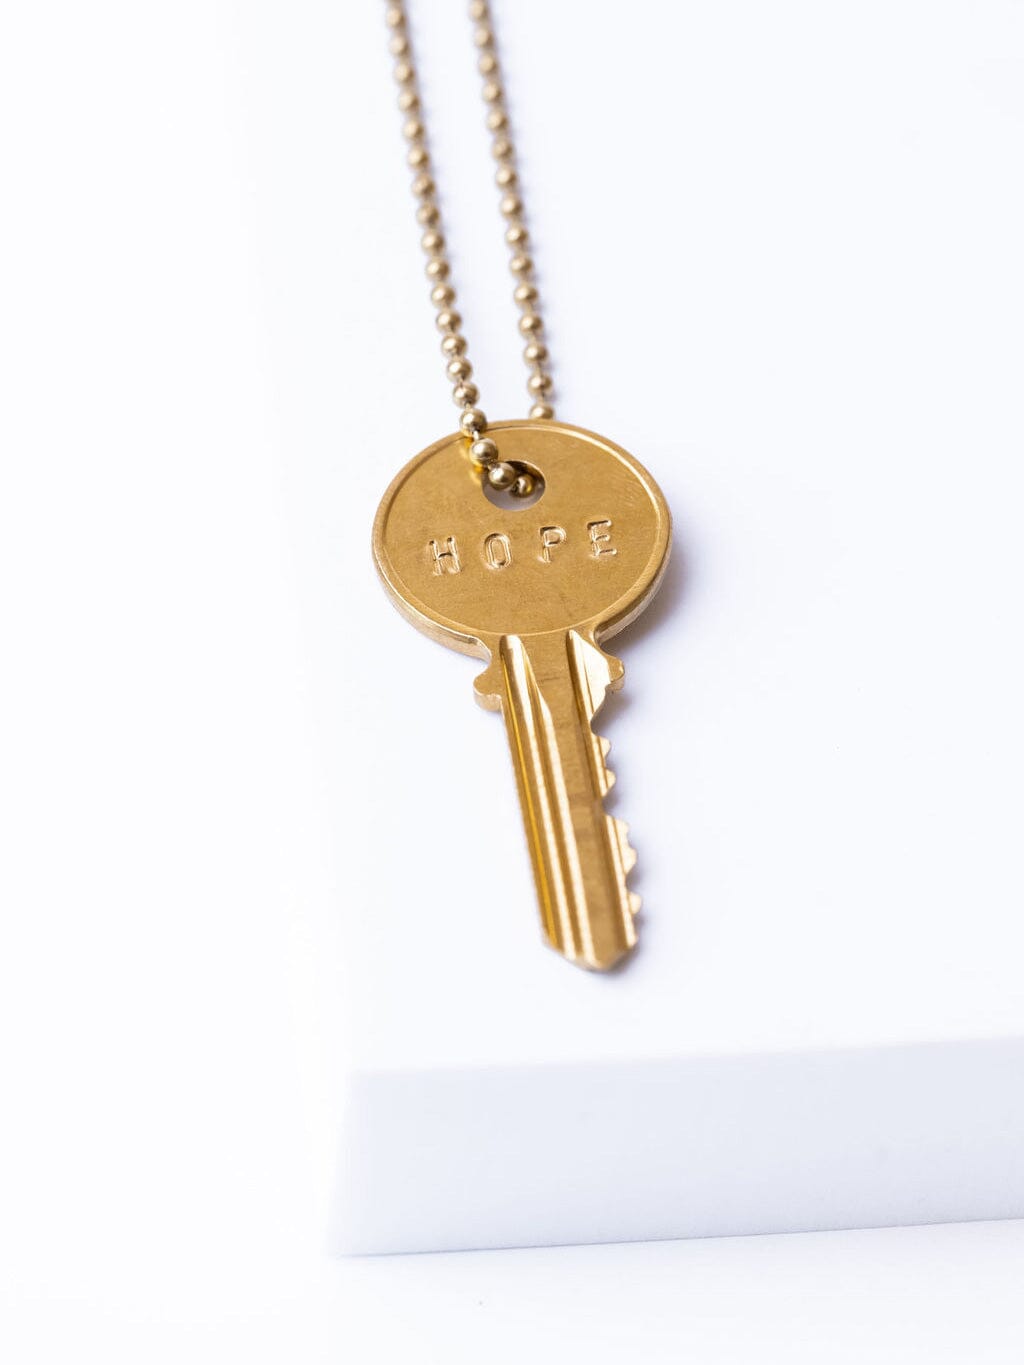 N - Classic Ball Chain Key Necklace Necklaces The Giving Keys 